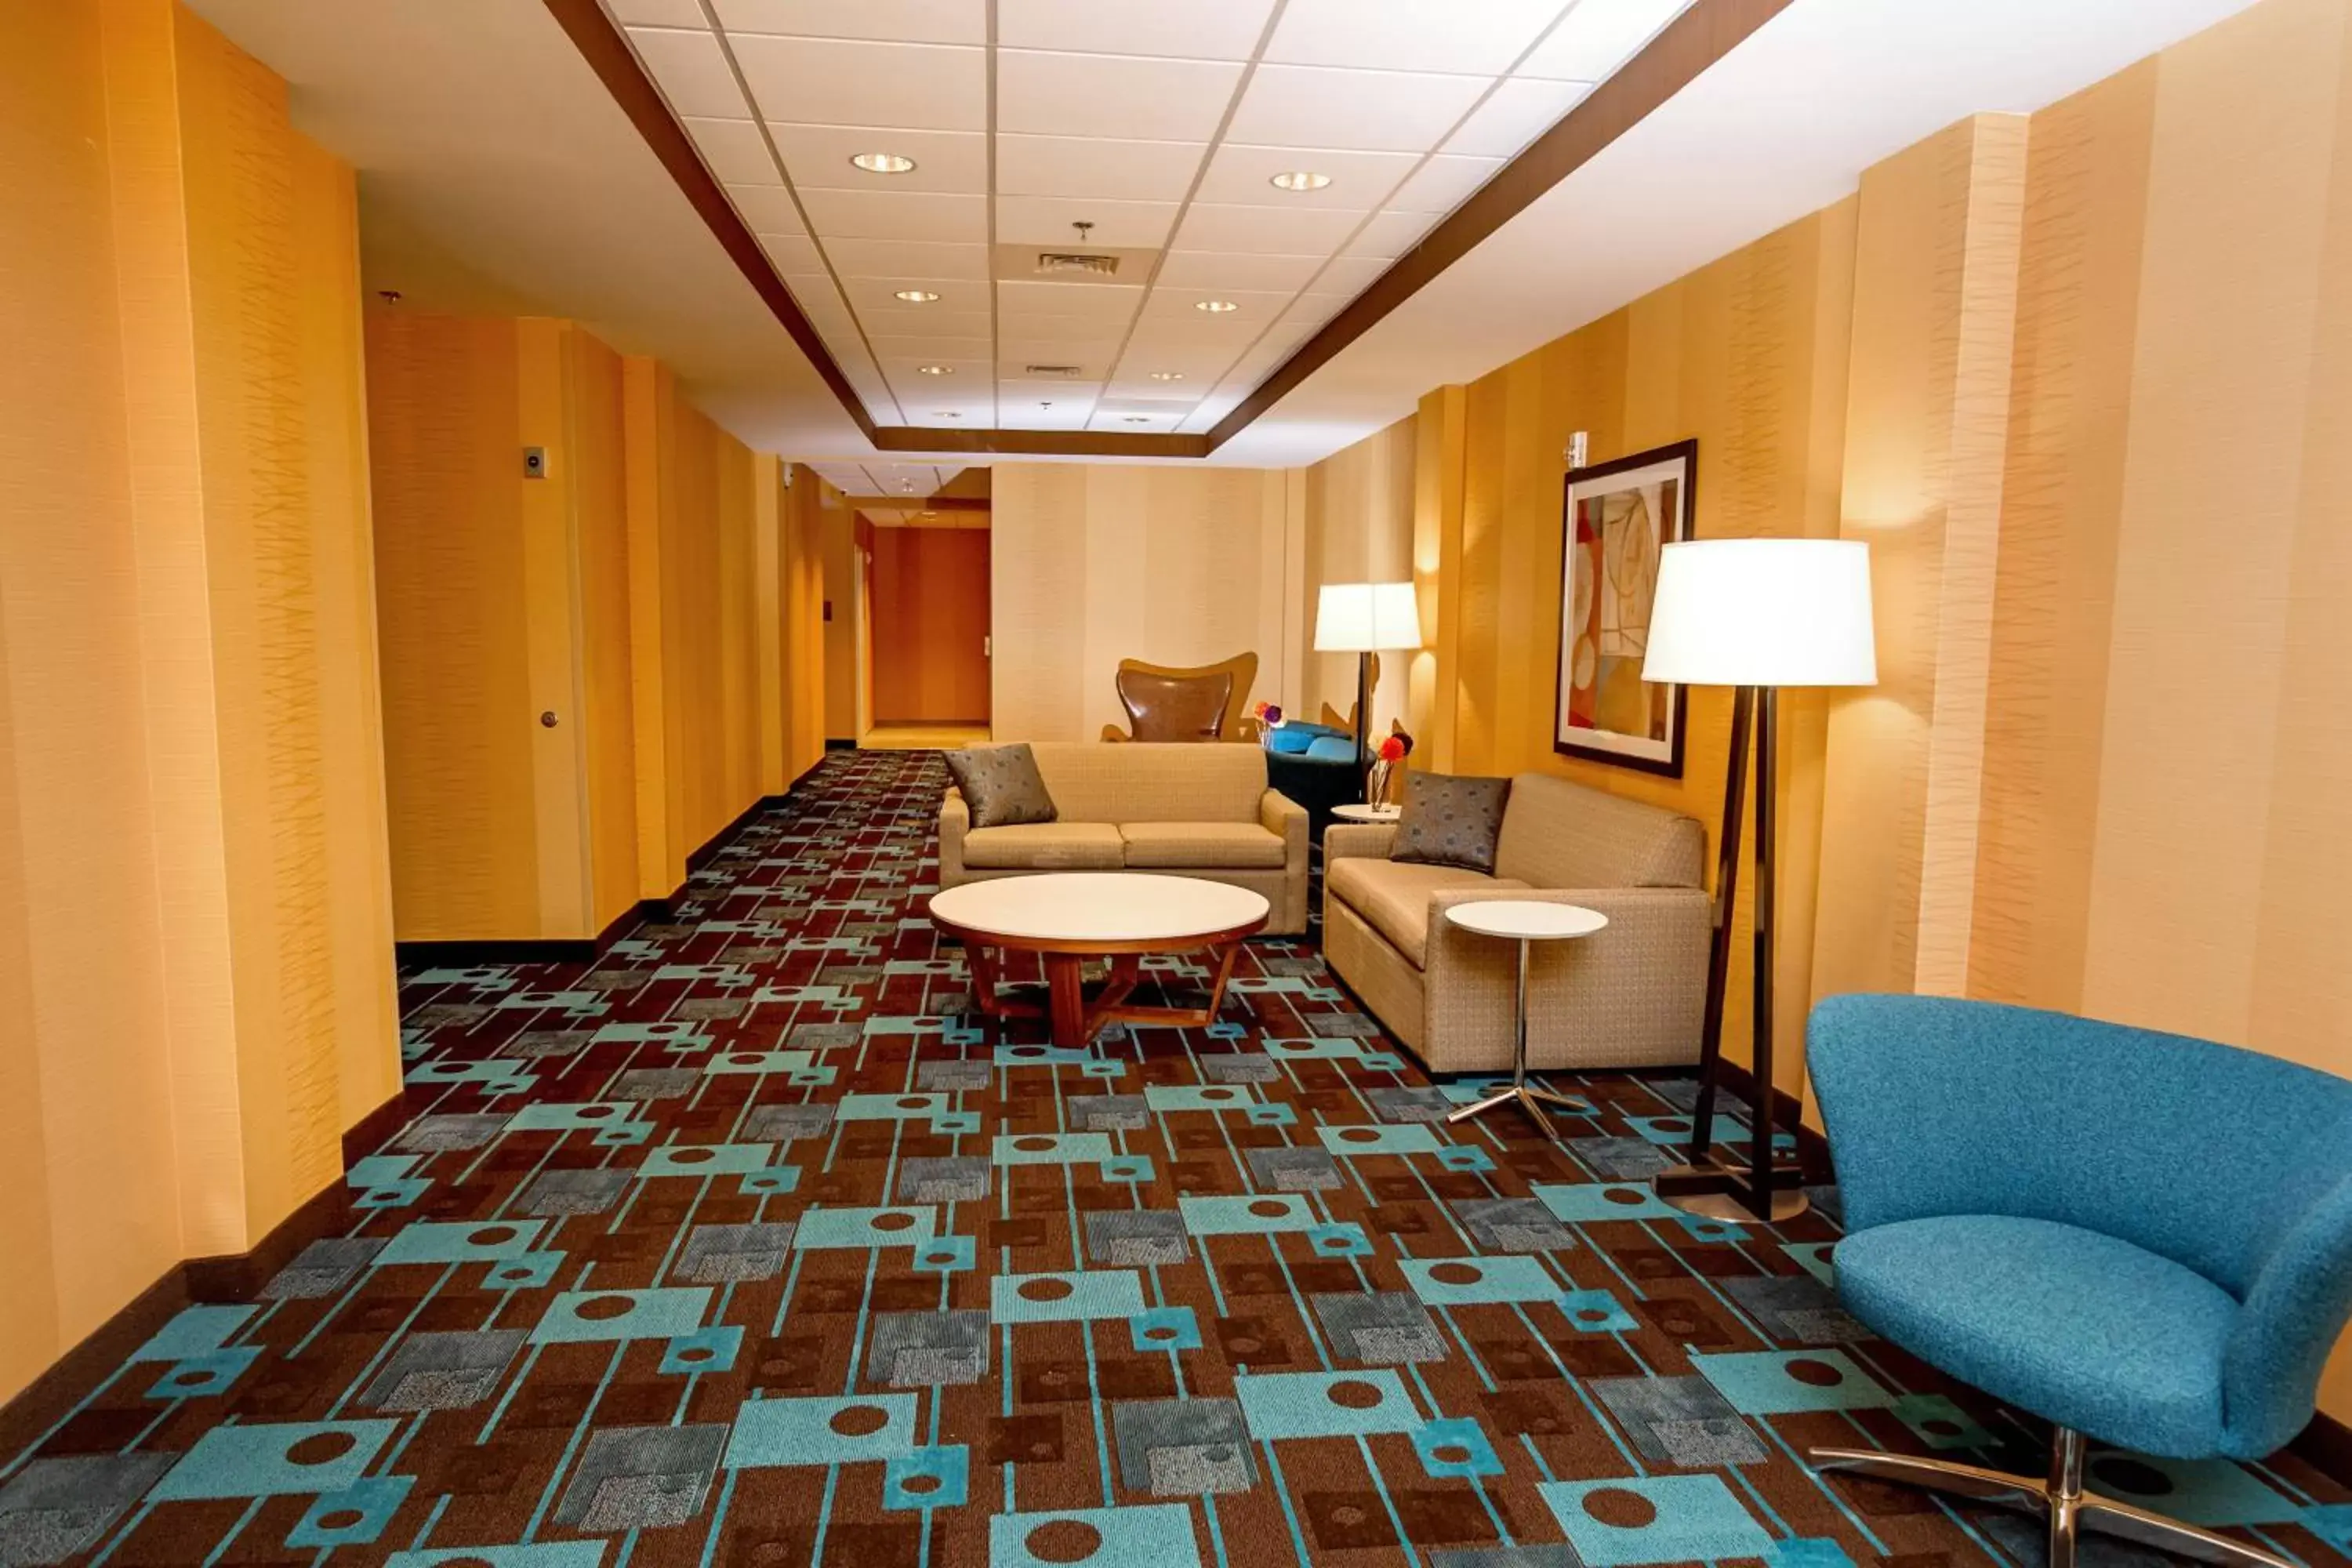 Meeting/conference room in Fairfield Inn & Suites by Marriott Richmond Midlothian